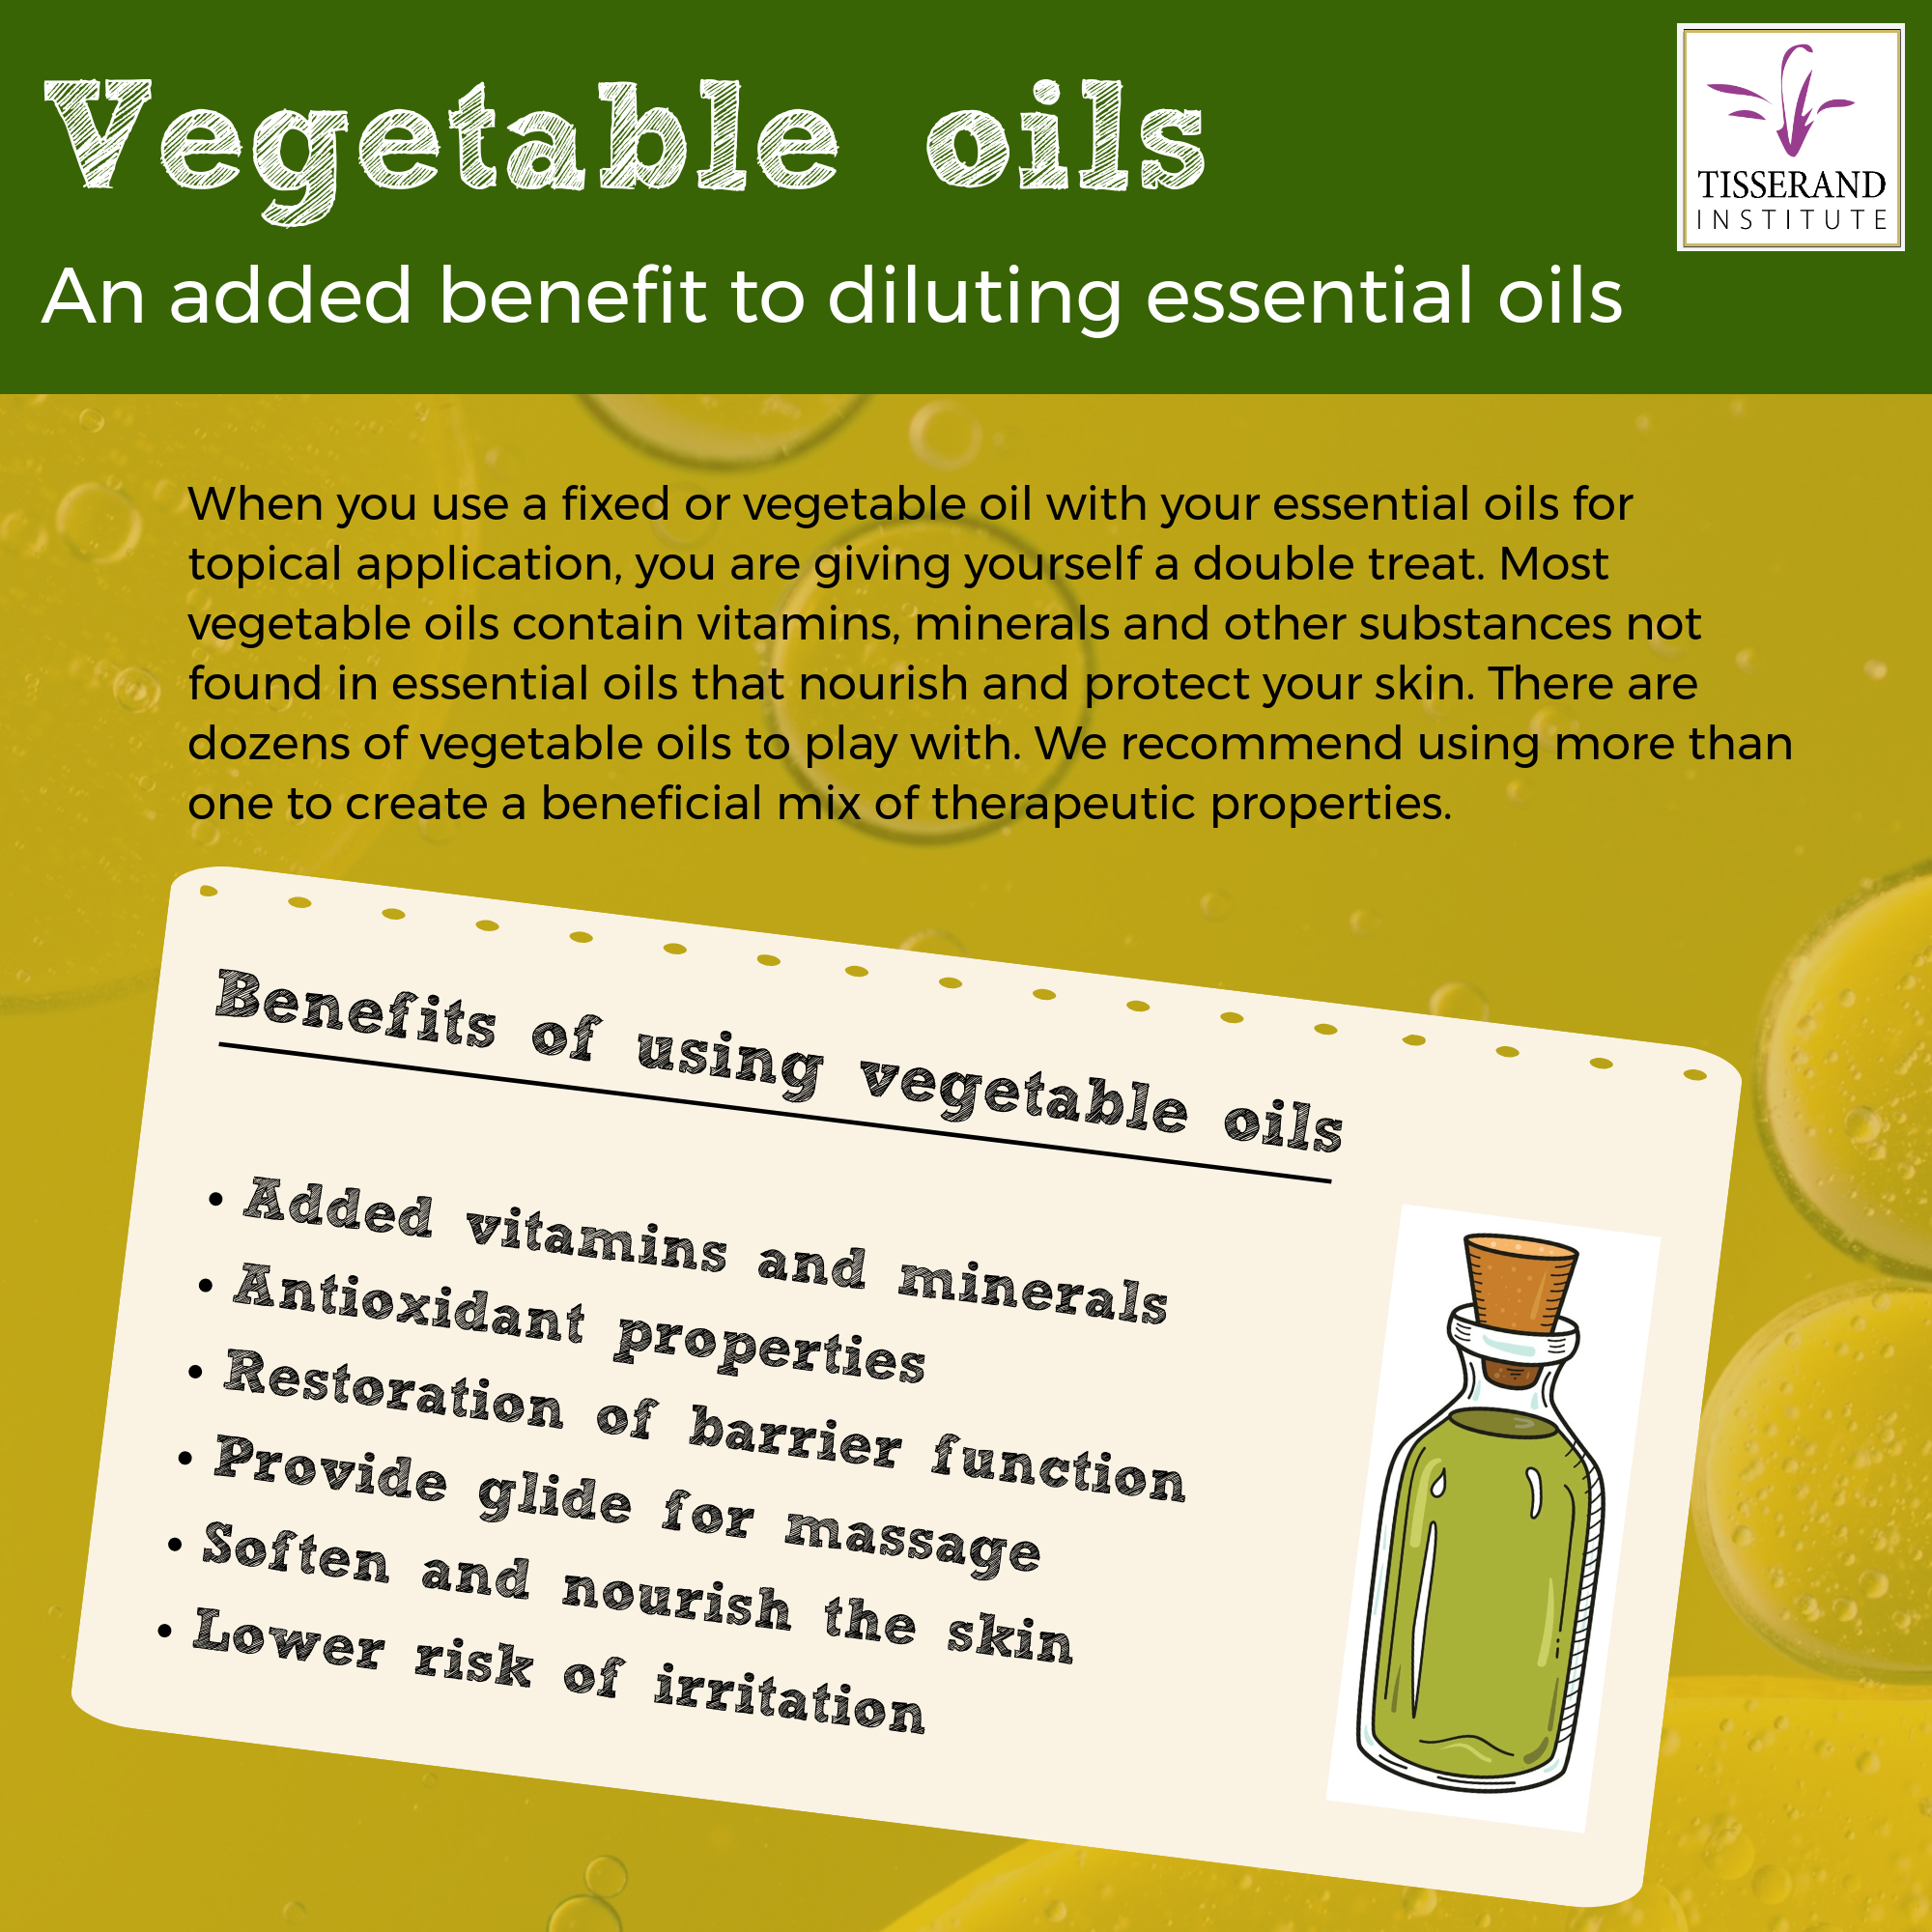 Vegetable oils: an added benefit to diluting your essential oils